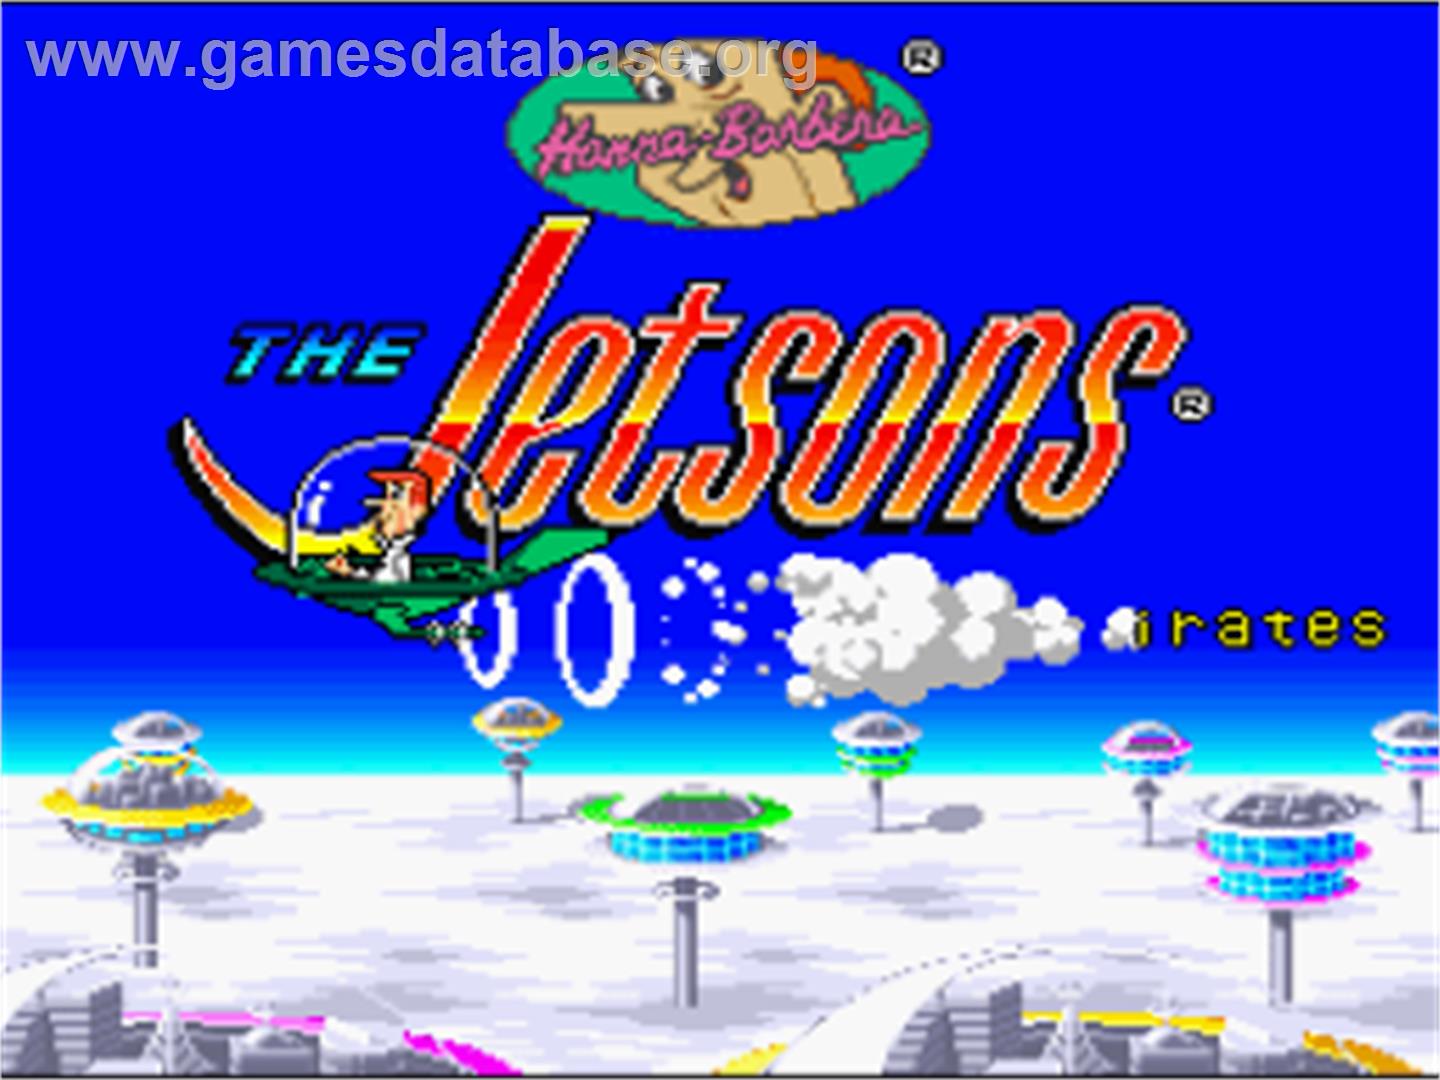 The Jetsons: Invasion of the Planet Pirates - Nintendo SNES - Artwork - Title Screen